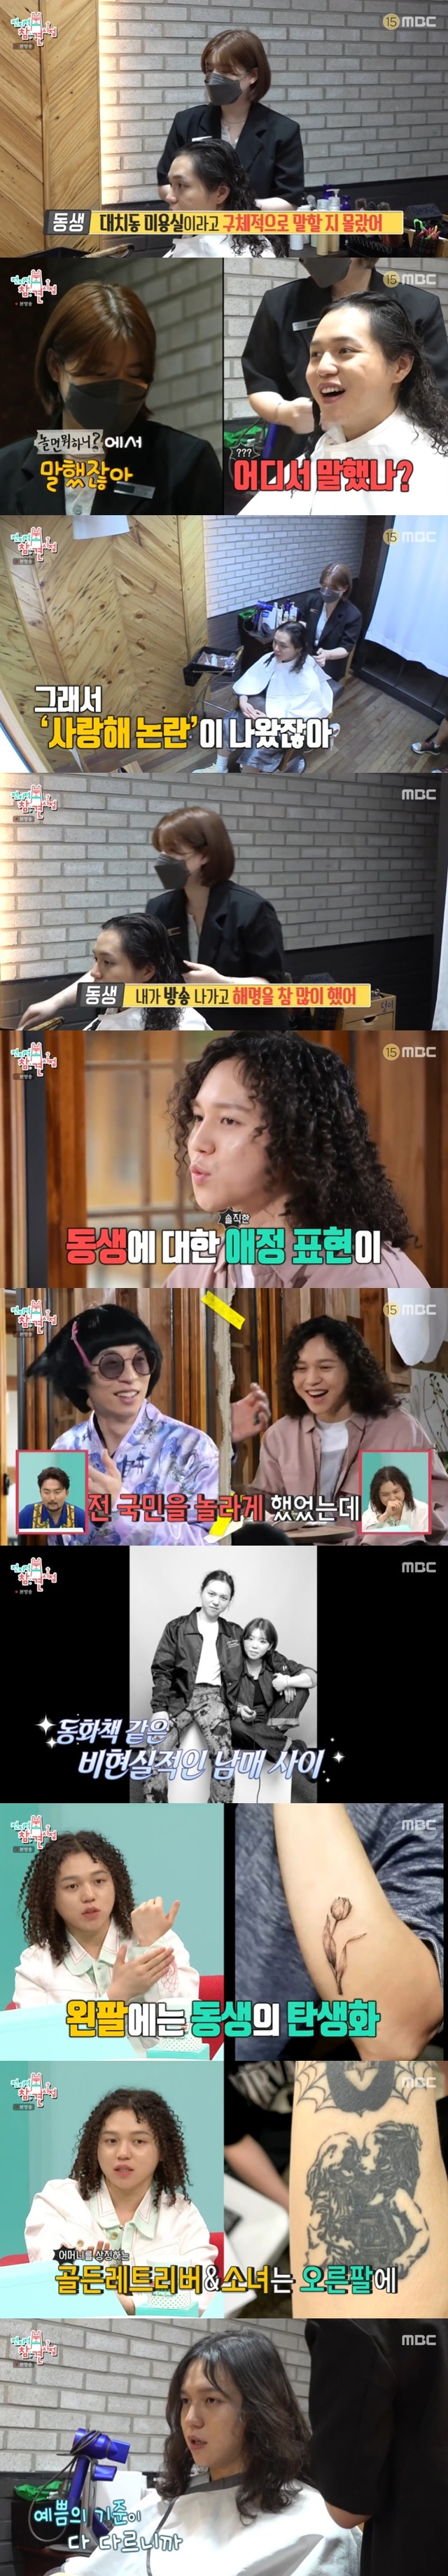 Wenstein Bungeo-pang younger Sister worried about the pretty controversy following the I love you controversy.Wenstein appeared on MBC Point of Omniscient Interfere broadcast on August 21st.On this day, Wensteins Haru started by eating Poop Pont Ponkery together at his best friends house.The best friend lives close by and is preparing to work as the manager of Wenstein, who also impressed him by revealing that he had also made a deposit for Friends home.Wenstein showed his sincerity in skin care by transferring beauty know-how to Friend, followed by a friendly phone conversation with his mother and grandmother.Wenstein CEO Mommy Son said, I think it was just a day before I came out as a neighbor of Mommy Son in What do you play?After Shomi, I had a lot of trouble. I was the top-ranked company. Im an MVP employee. Im the employee of the month.When Mommyson called only Wenstein, he said, Mommy hands are not the most popular. I raised a tiger cub.Wensteins next destination is the Daechi-dong beauty salon where younger Sister works.I have to go quickly before I know my brother, said younger Sister, who immediately put Wenstein in the chair of the beauty salon and said, I did not know if my brother would specifically say that it was a Daechi-dong beauty salon.Wenstein did not remember, Did I tell you? And younger Sister responded, I love you when you say What do you play? Wenstein was surprised and surprised Yoo Jae-seok by saying that he often said that he loved younger master in What do you do?Wenstein younger Sister said, I have been on the air and explained a lot, and it came out too sweetly. After the broadcast, I explained a lot of controversy about my love.Wenstein is two years old from younger sister, but he is a fast year old.Wenstein also revealed his family love by saying that he had a tulip tattoo, the birth of younger sister, and a golden retriever symbolizing his mother and a girl symbolizing younger sister.I think I love my mother and my family a lot, Wenstein Manager testified, and Im so close to each other, I think Im really a real brother and sister.Wenstein younger sitter, who is in charge of his brothers hairstyle, said, Hes a big show. Sunwoo is also a TV. Elementary school students listen to hip-hop. You know Wenstein?I like it all, he said, asking for Signs, and he admired him as a real star because he was a head and sign. Wenstein younger Sister was worried about her more beautiful hairstyle, saying, I do not like you to be more beautiful than me. Wenstein was surprised to praise her sister for being beautiful.Wenstein younger Sister said, I love this, I love you, I am pretty to my brother. I love you, and I was worried about the controversy.Wenstein explained, Everyone has different standards of goodness. When younger Sister asked, Do you like any of the hair you have done on the air? He said, Now this hair and once again revealed his family love.Younger sister was pleased with Wensteins praise, saying he was impressive. After that, Wenstein finished his Haru routine with a concert practice with Gianti.